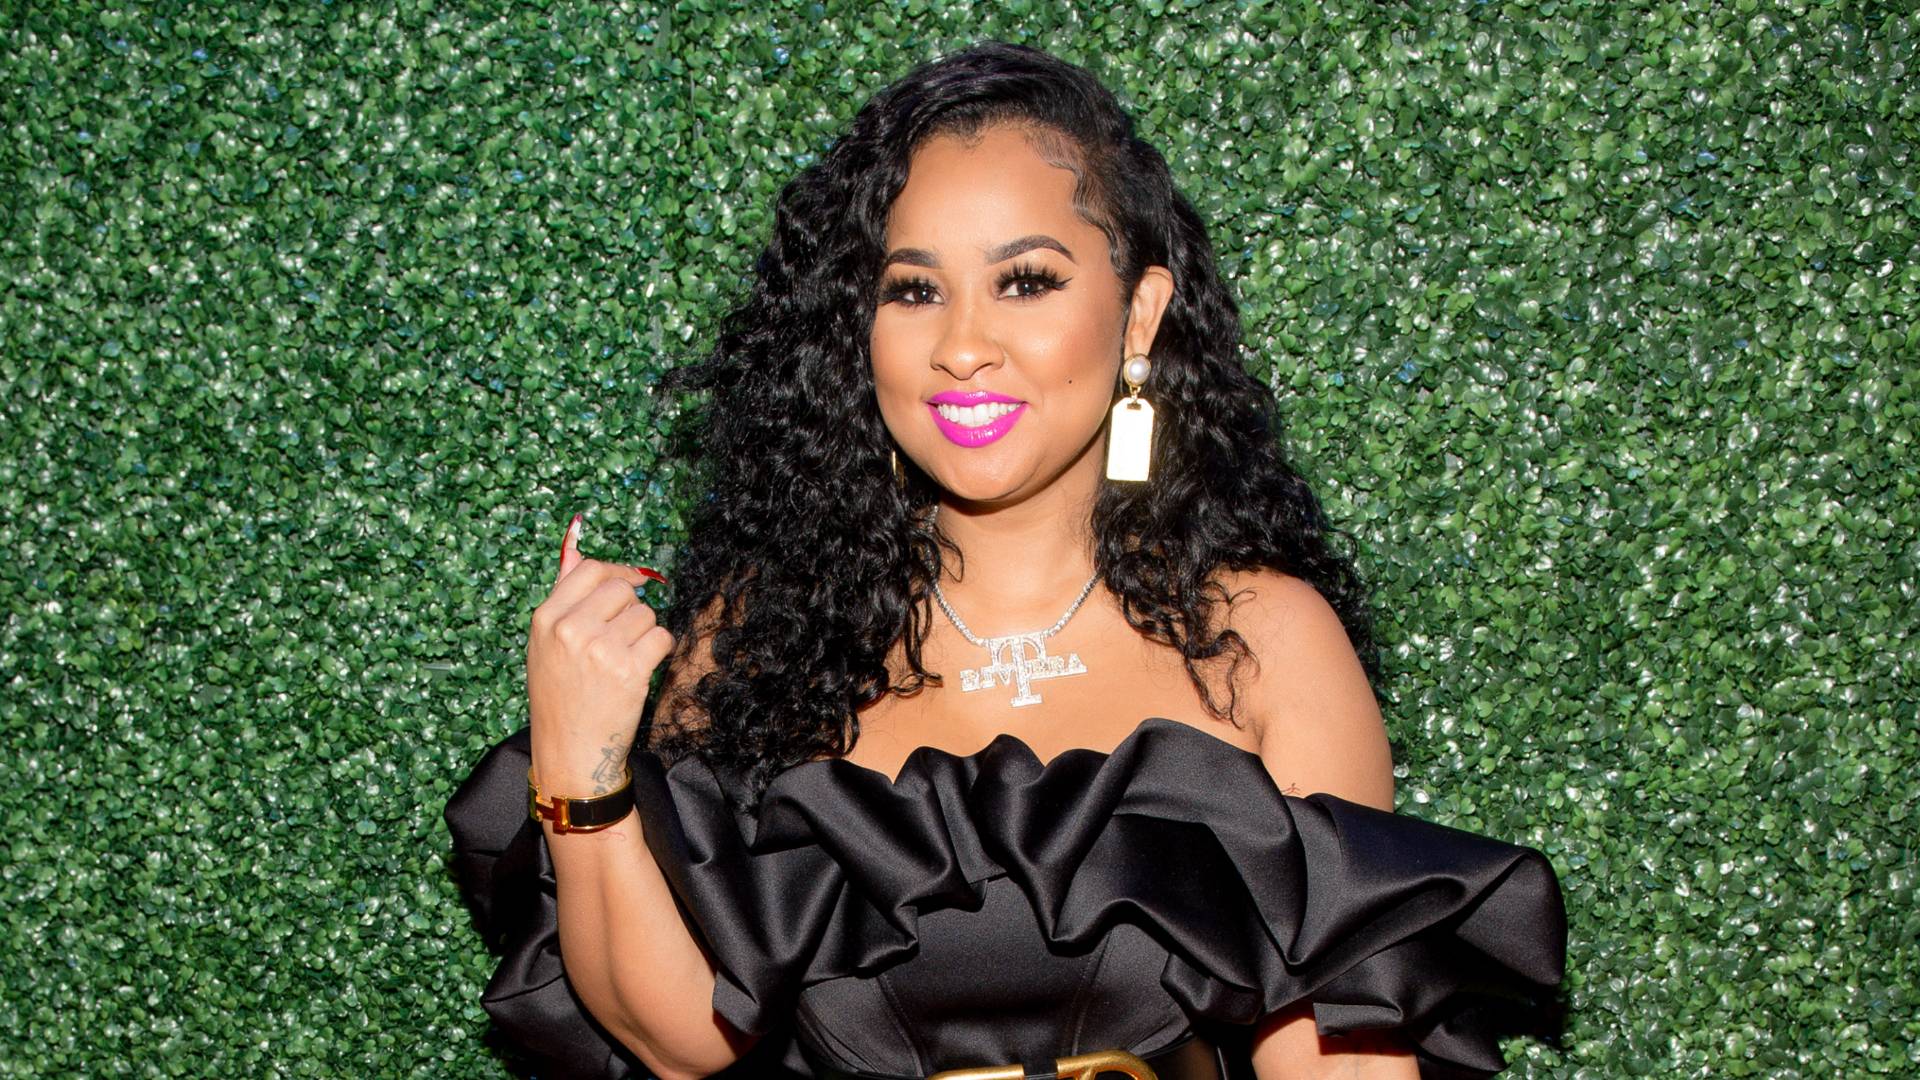 Tammy Rivera attends her private album listening party at Lips on February 18, 2020 in Atlanta, Georgia. 